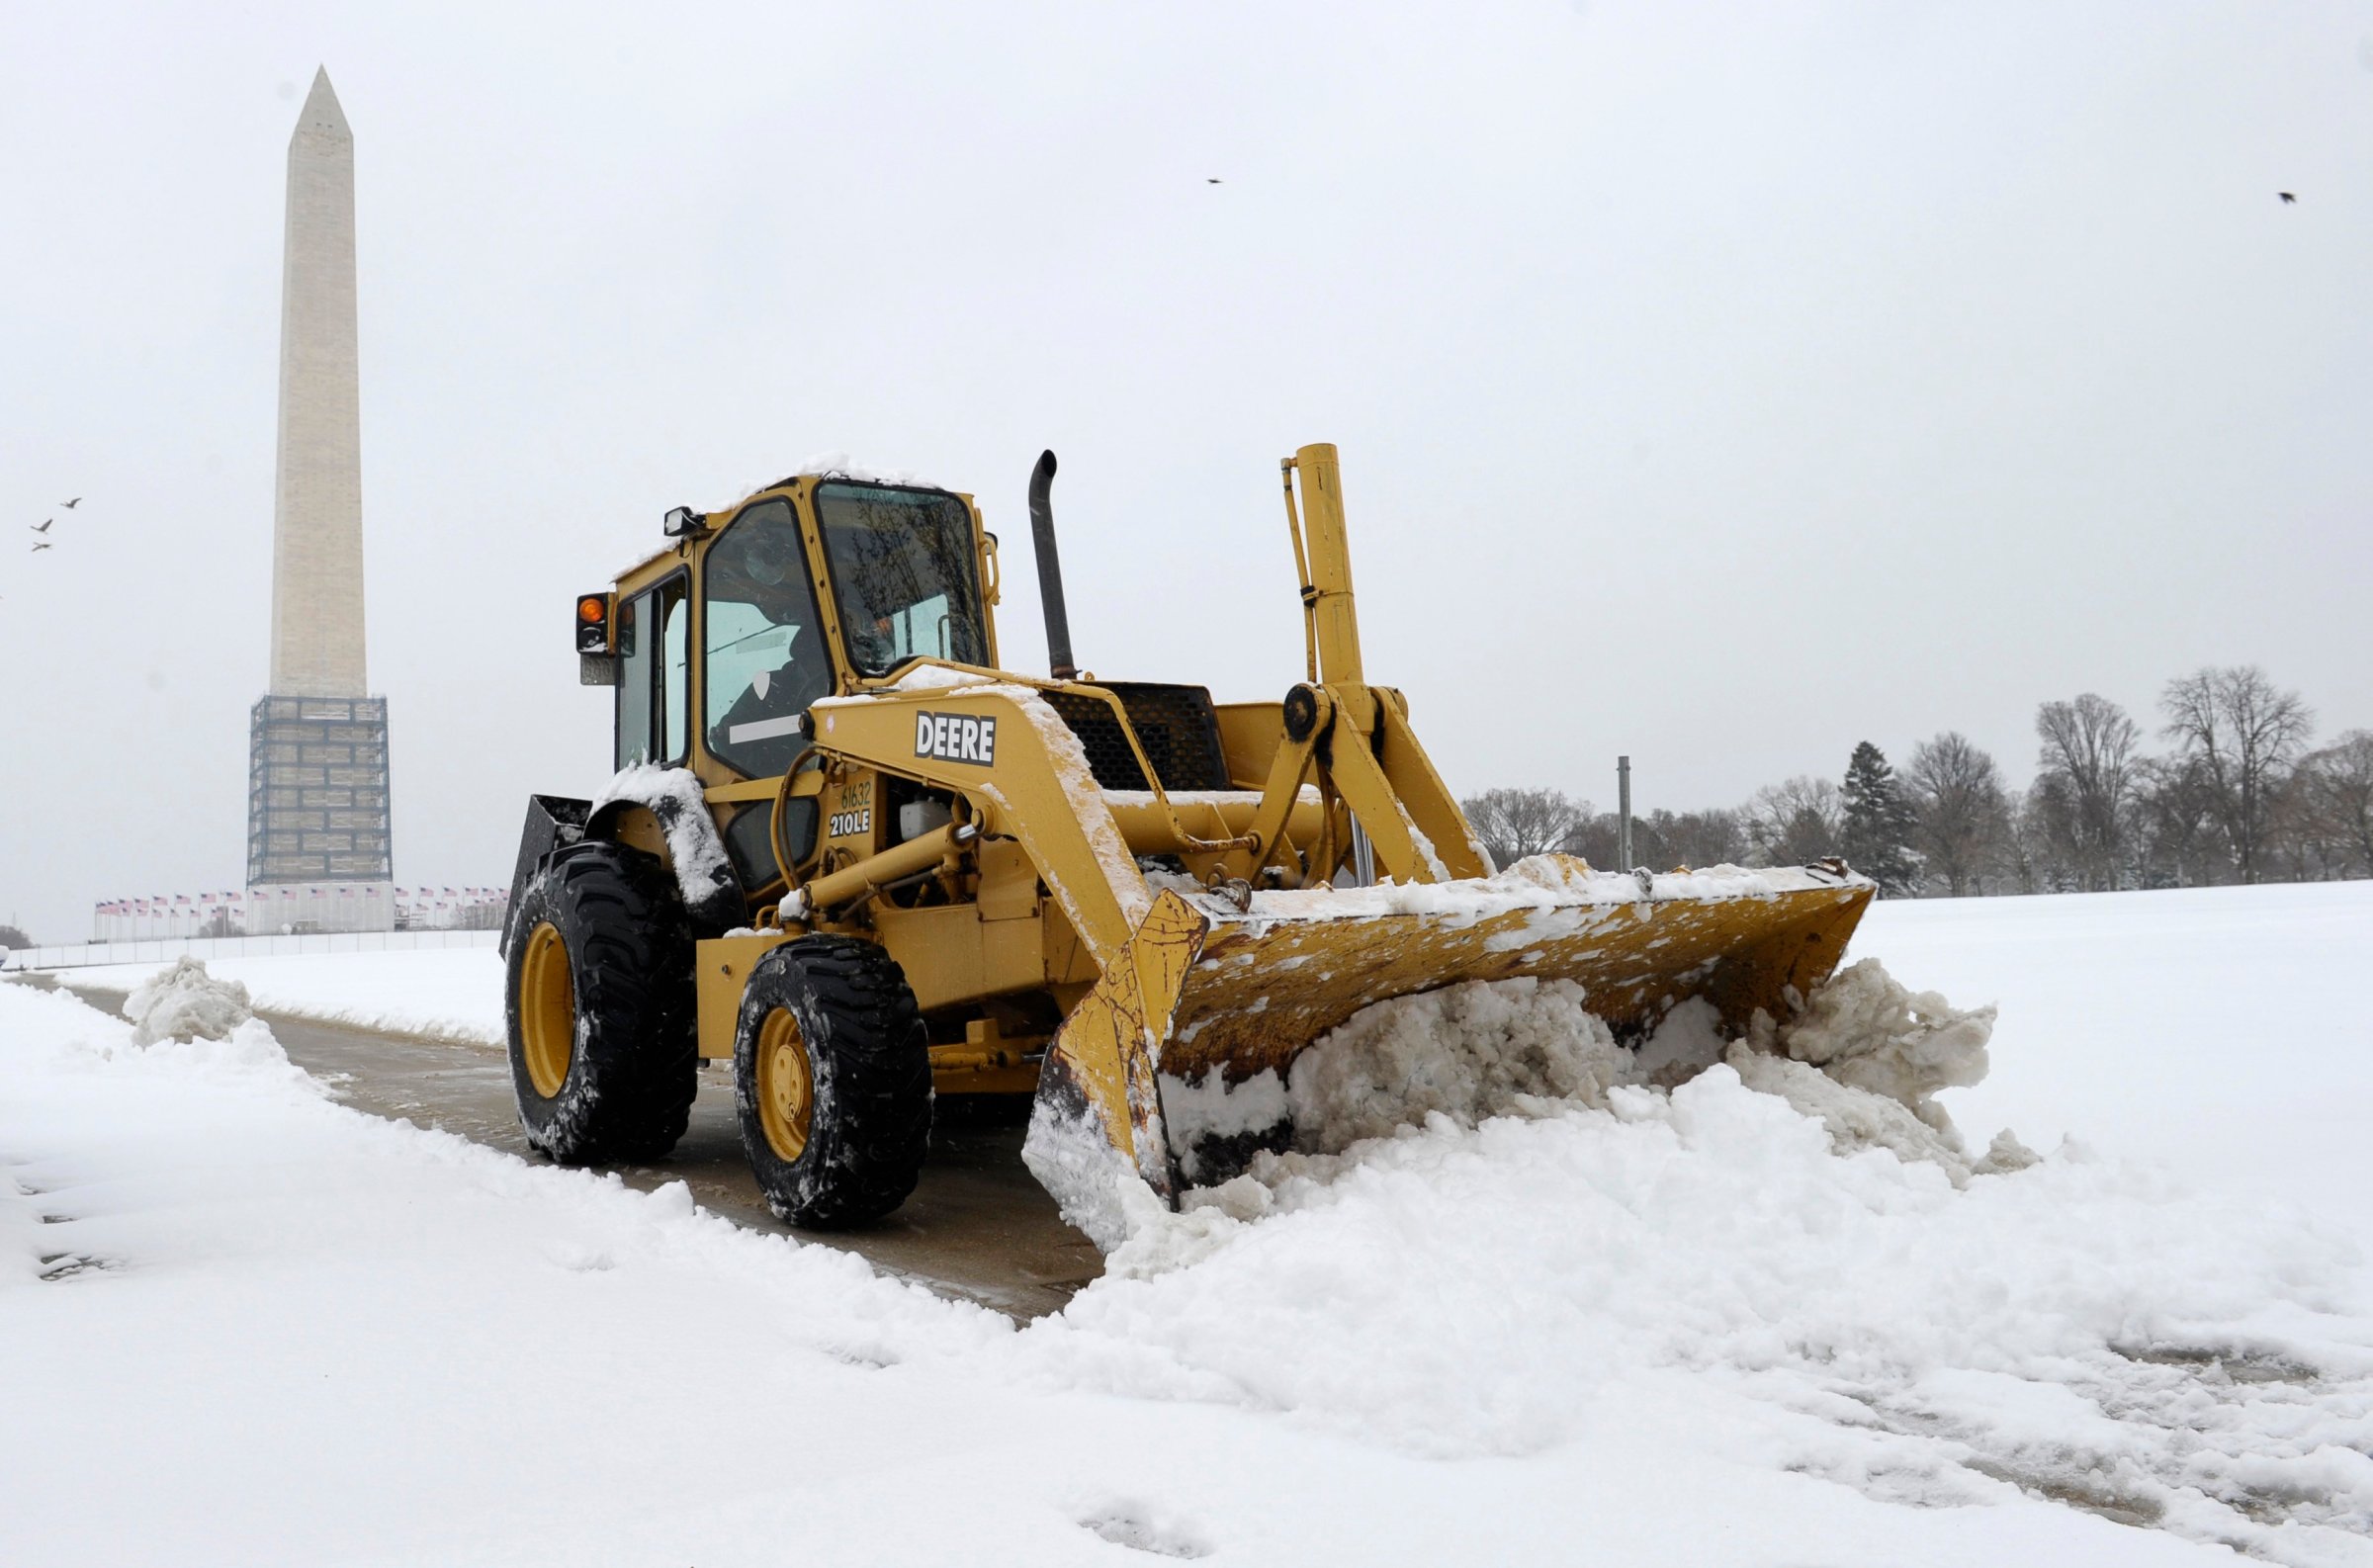 A snow plow clears the area around the Washington Monument in Washington, D.C. on March 17, 2014.